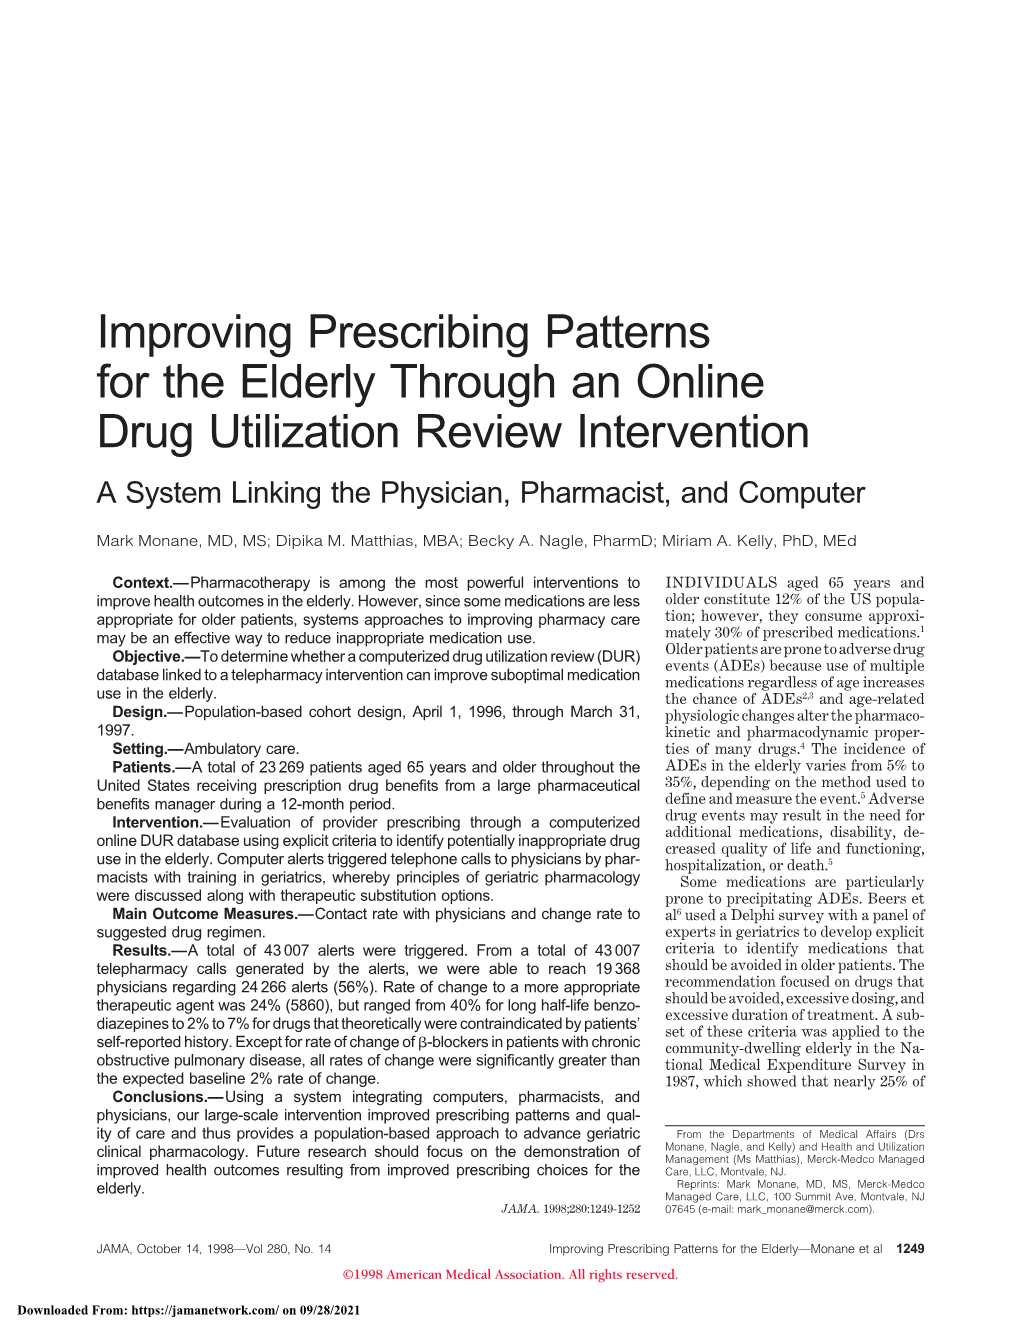 Improving Prescribing Patterns for the Elderly Through an Online Drug Utilization Review Intervention a System Linking the Physician, Pharmacist, and Computer